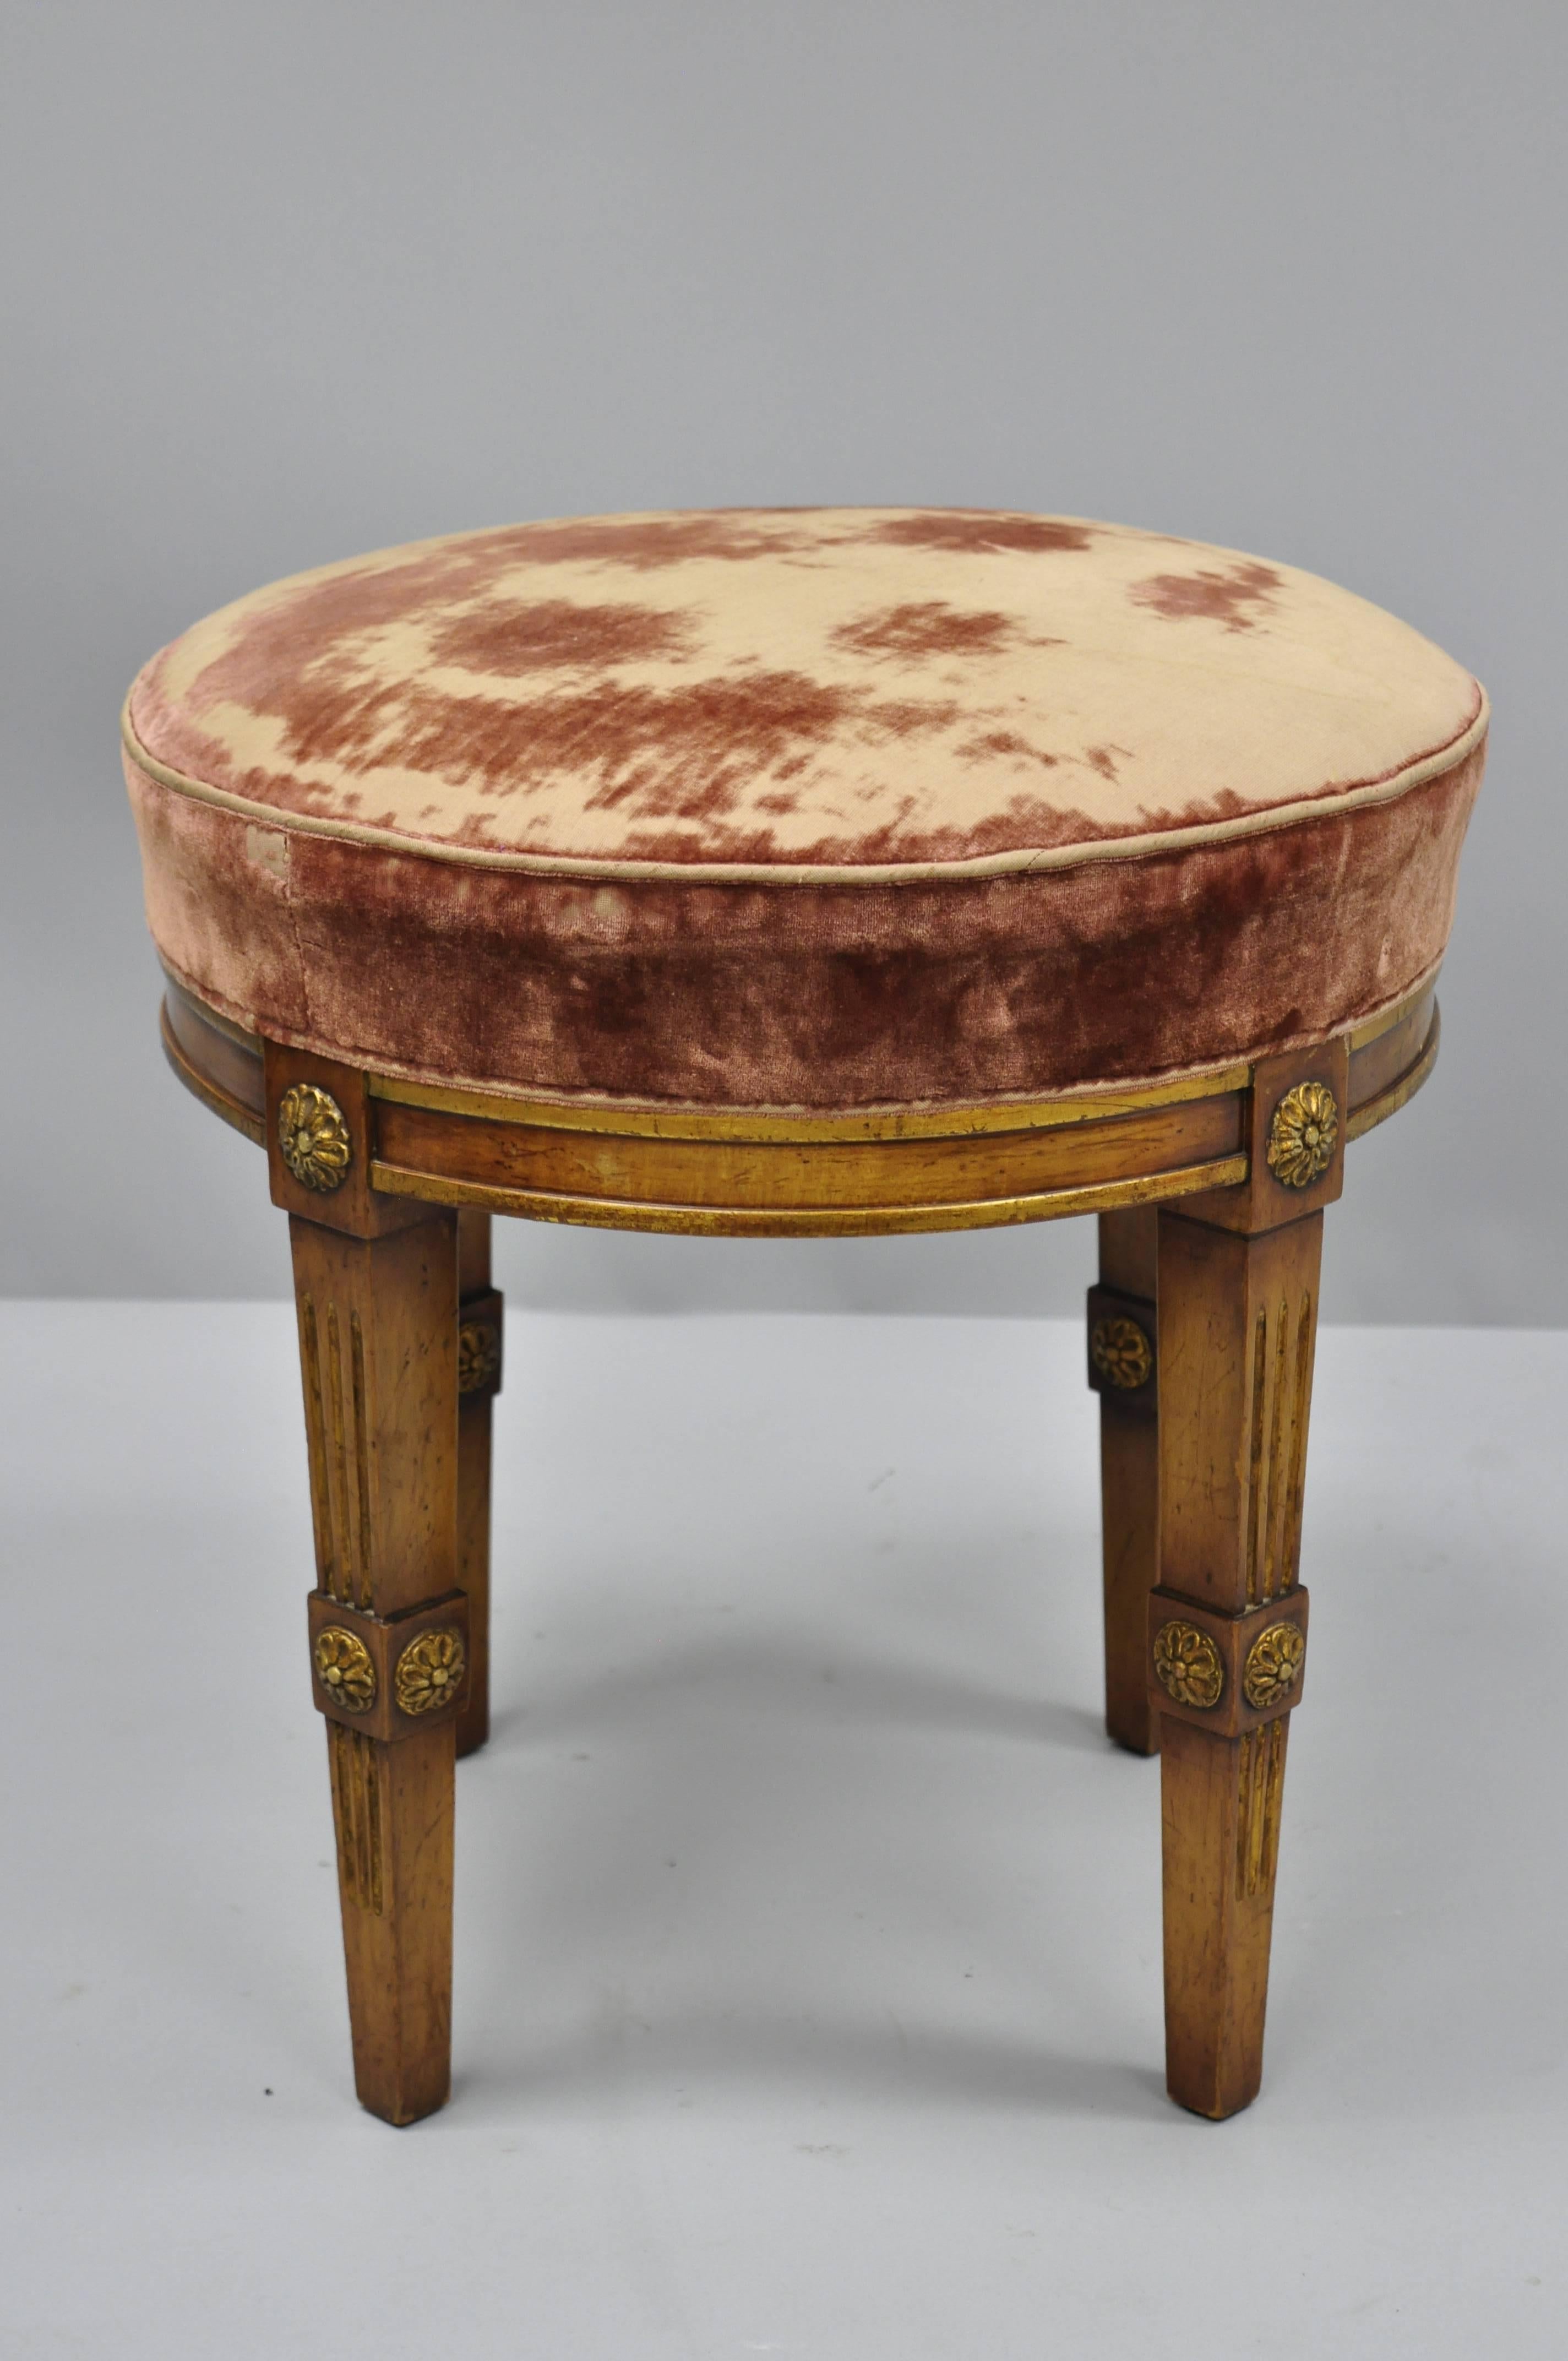 French Louis XVI Directoire style round neoclassical stool. Item features distressed gold gilt accents, wood rosettes, solid wood construction, tapered legs, circa early to mid-20th century. Measurements: 18.5